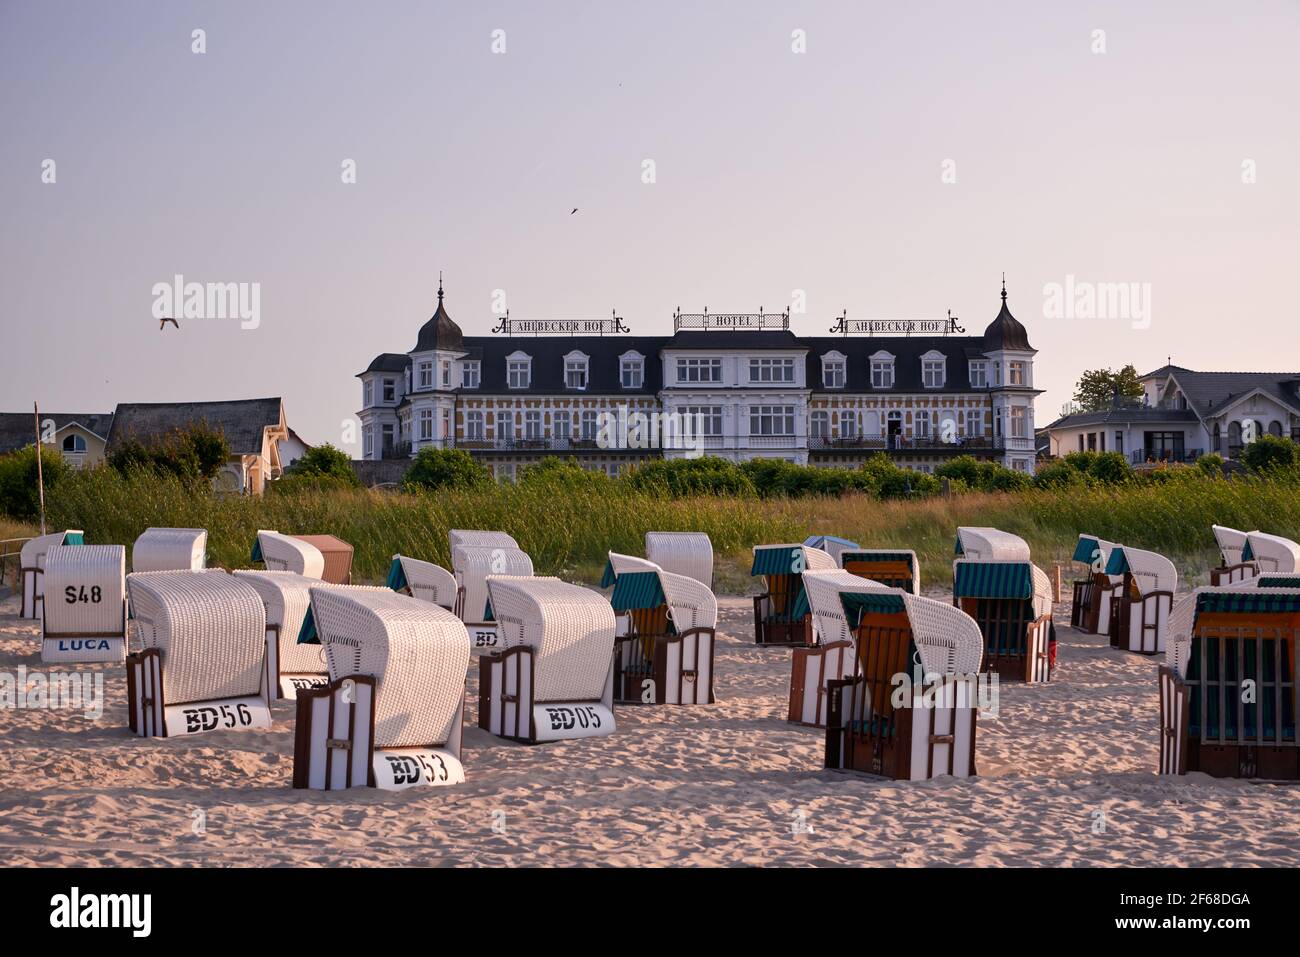 View of Hotel Ahlbecker Hof from the beach with beach chairs Stock Photo